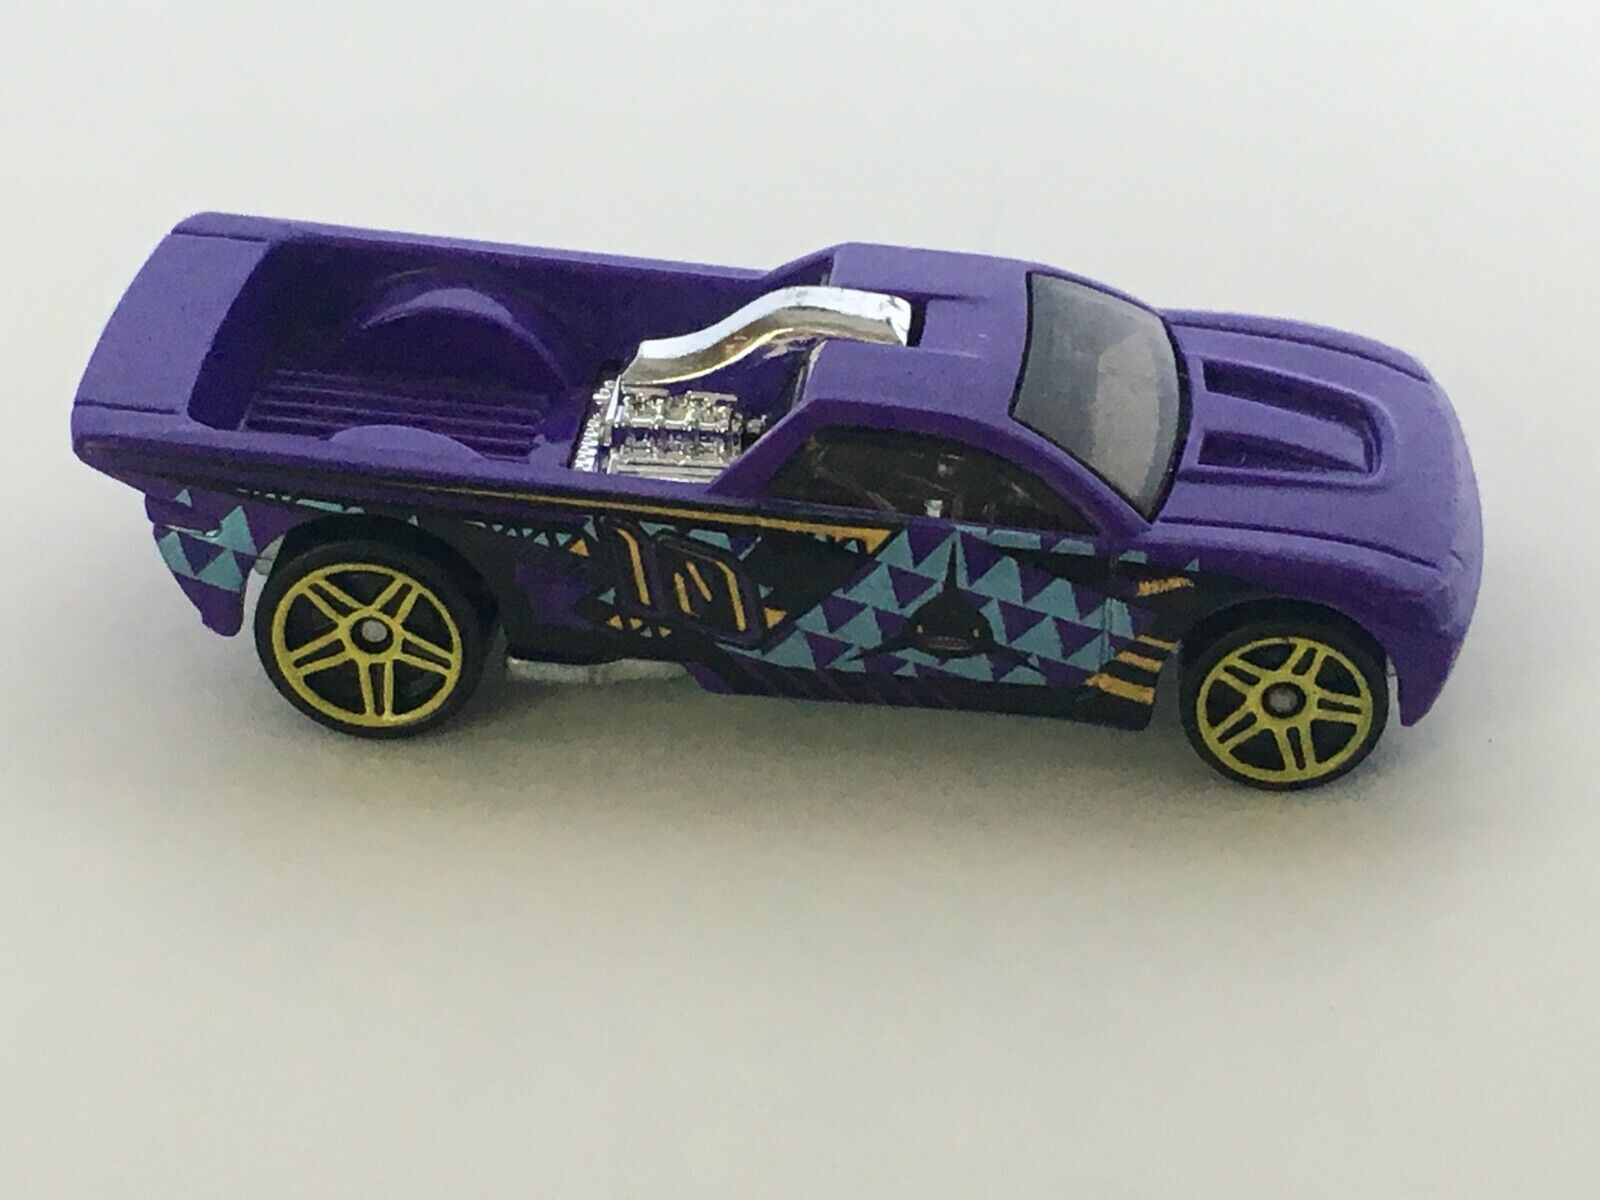 Primary image for Hot Wheels Bedlam Purple Shark Toy Pickup Truck Car 2004 L18 Tinted Windows